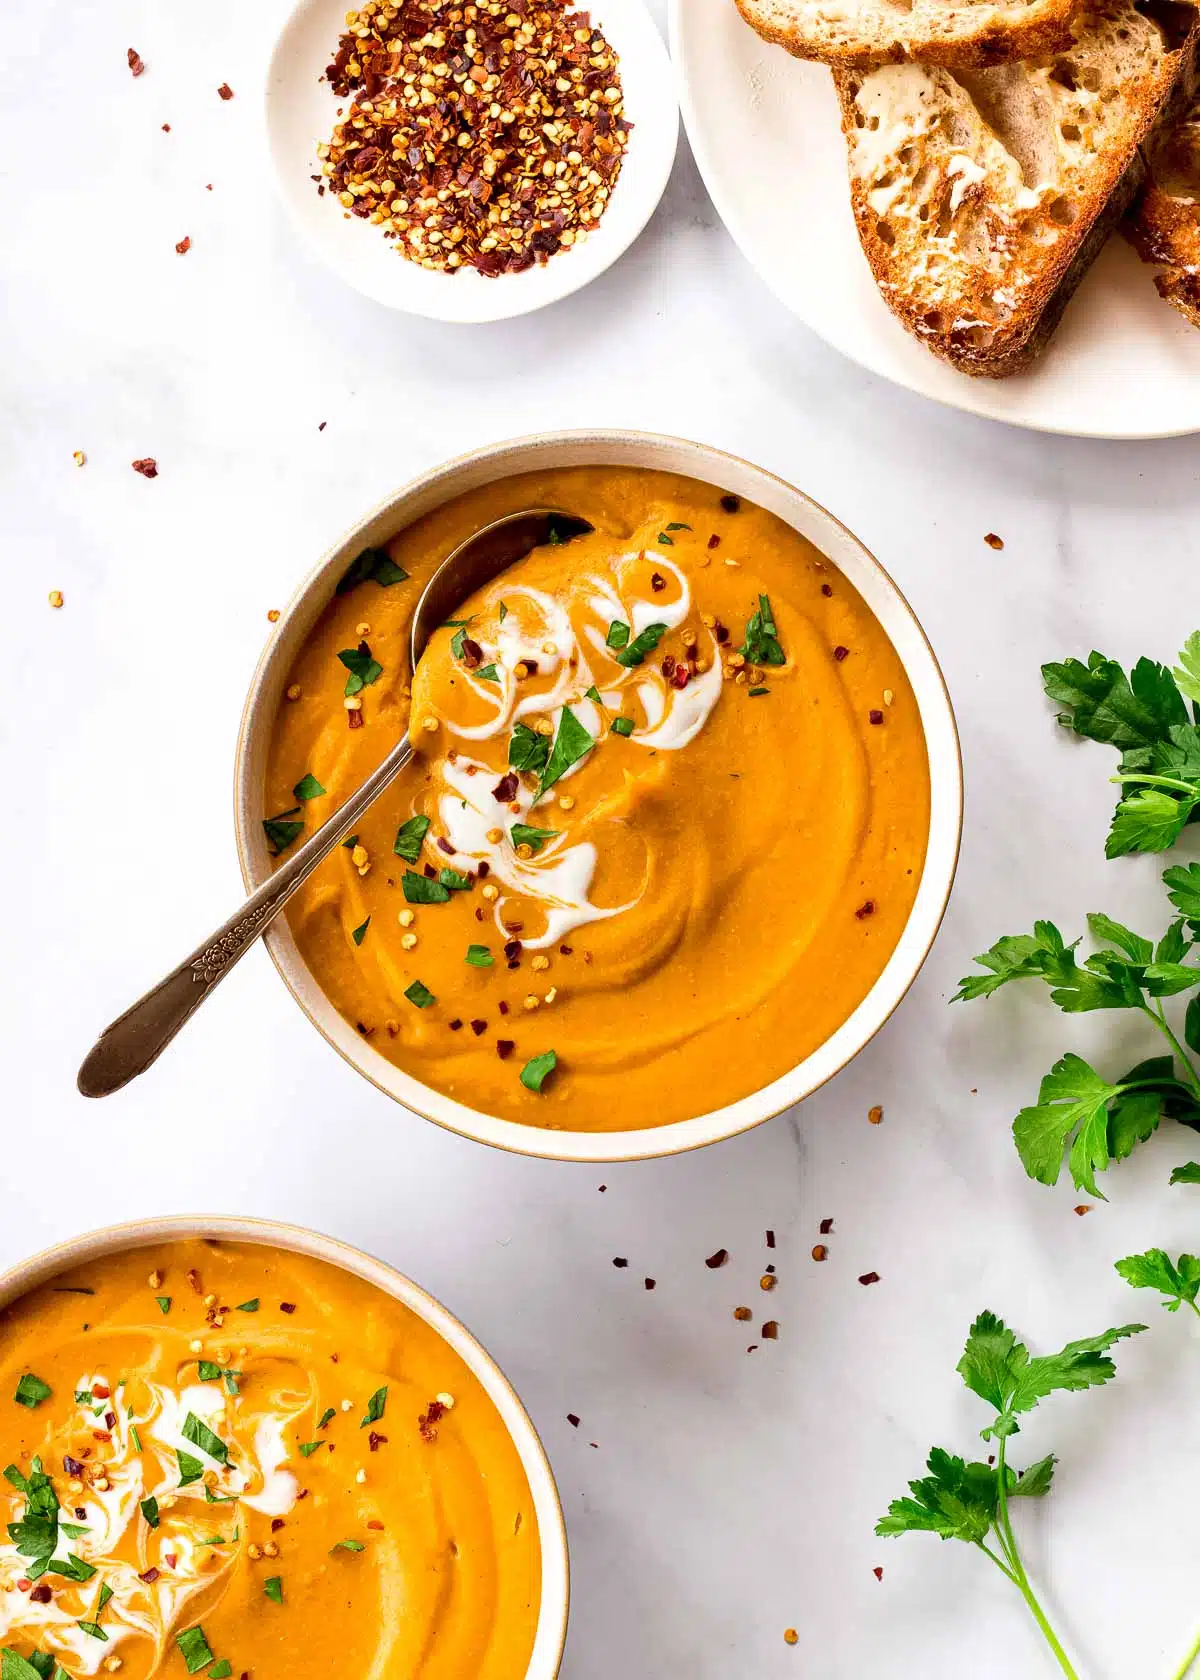 Two bowls of Carrot and Lentil Soup surrounded by chili flakes and fresh bread.